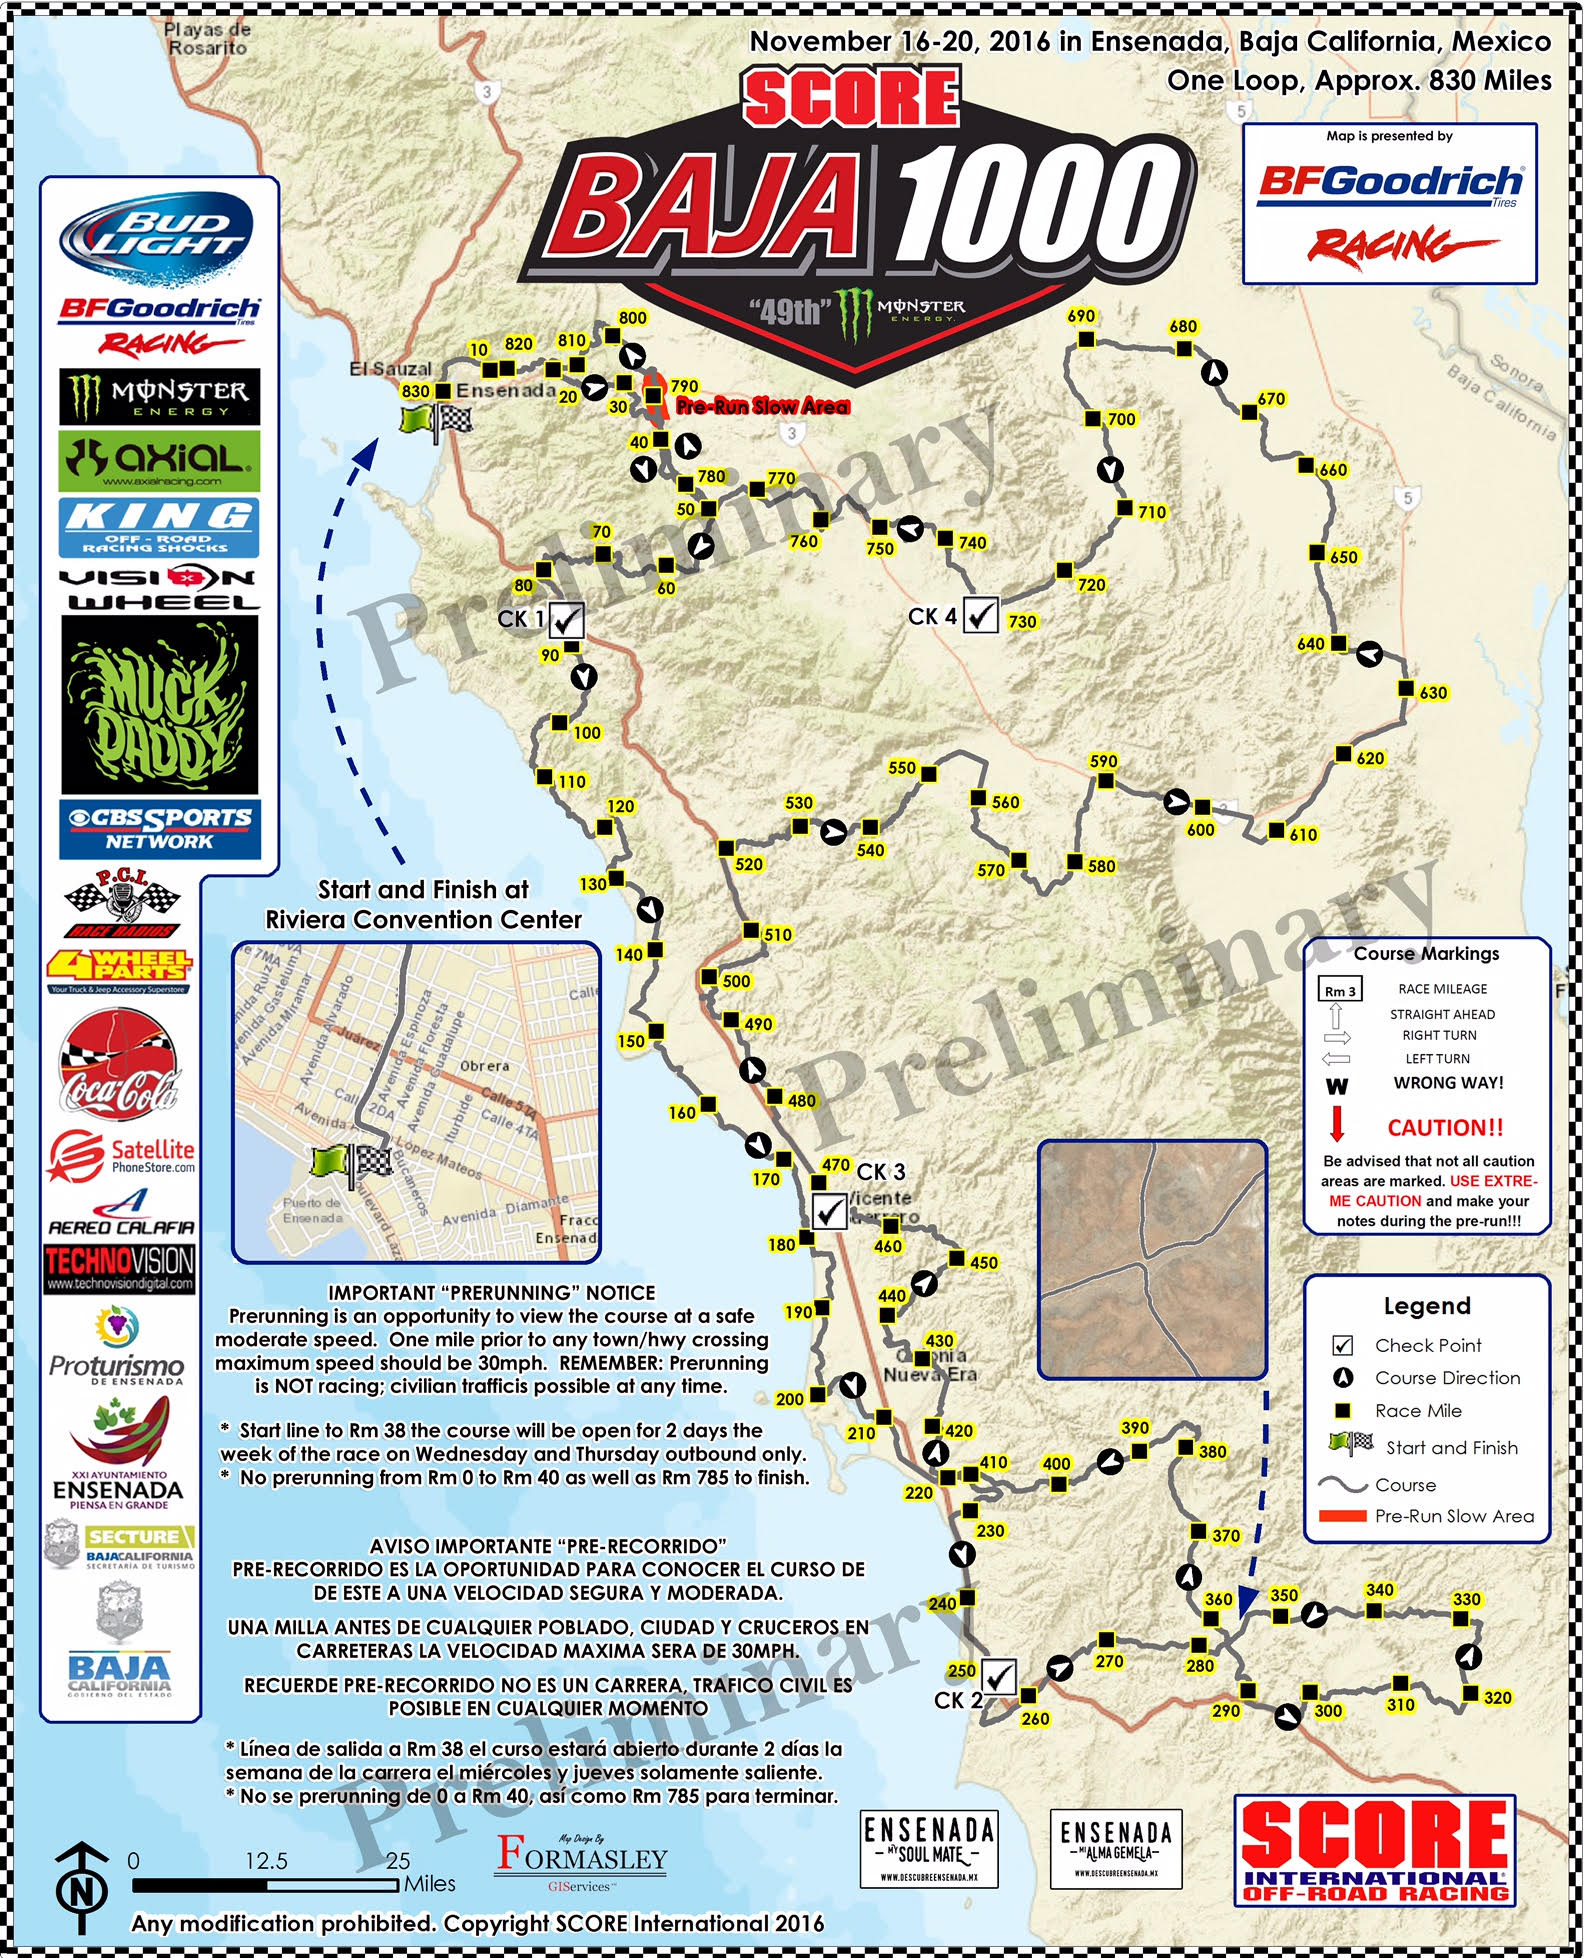 Course map unveiled for 49th annual SCORE Baja 1000 at colorful SCORE